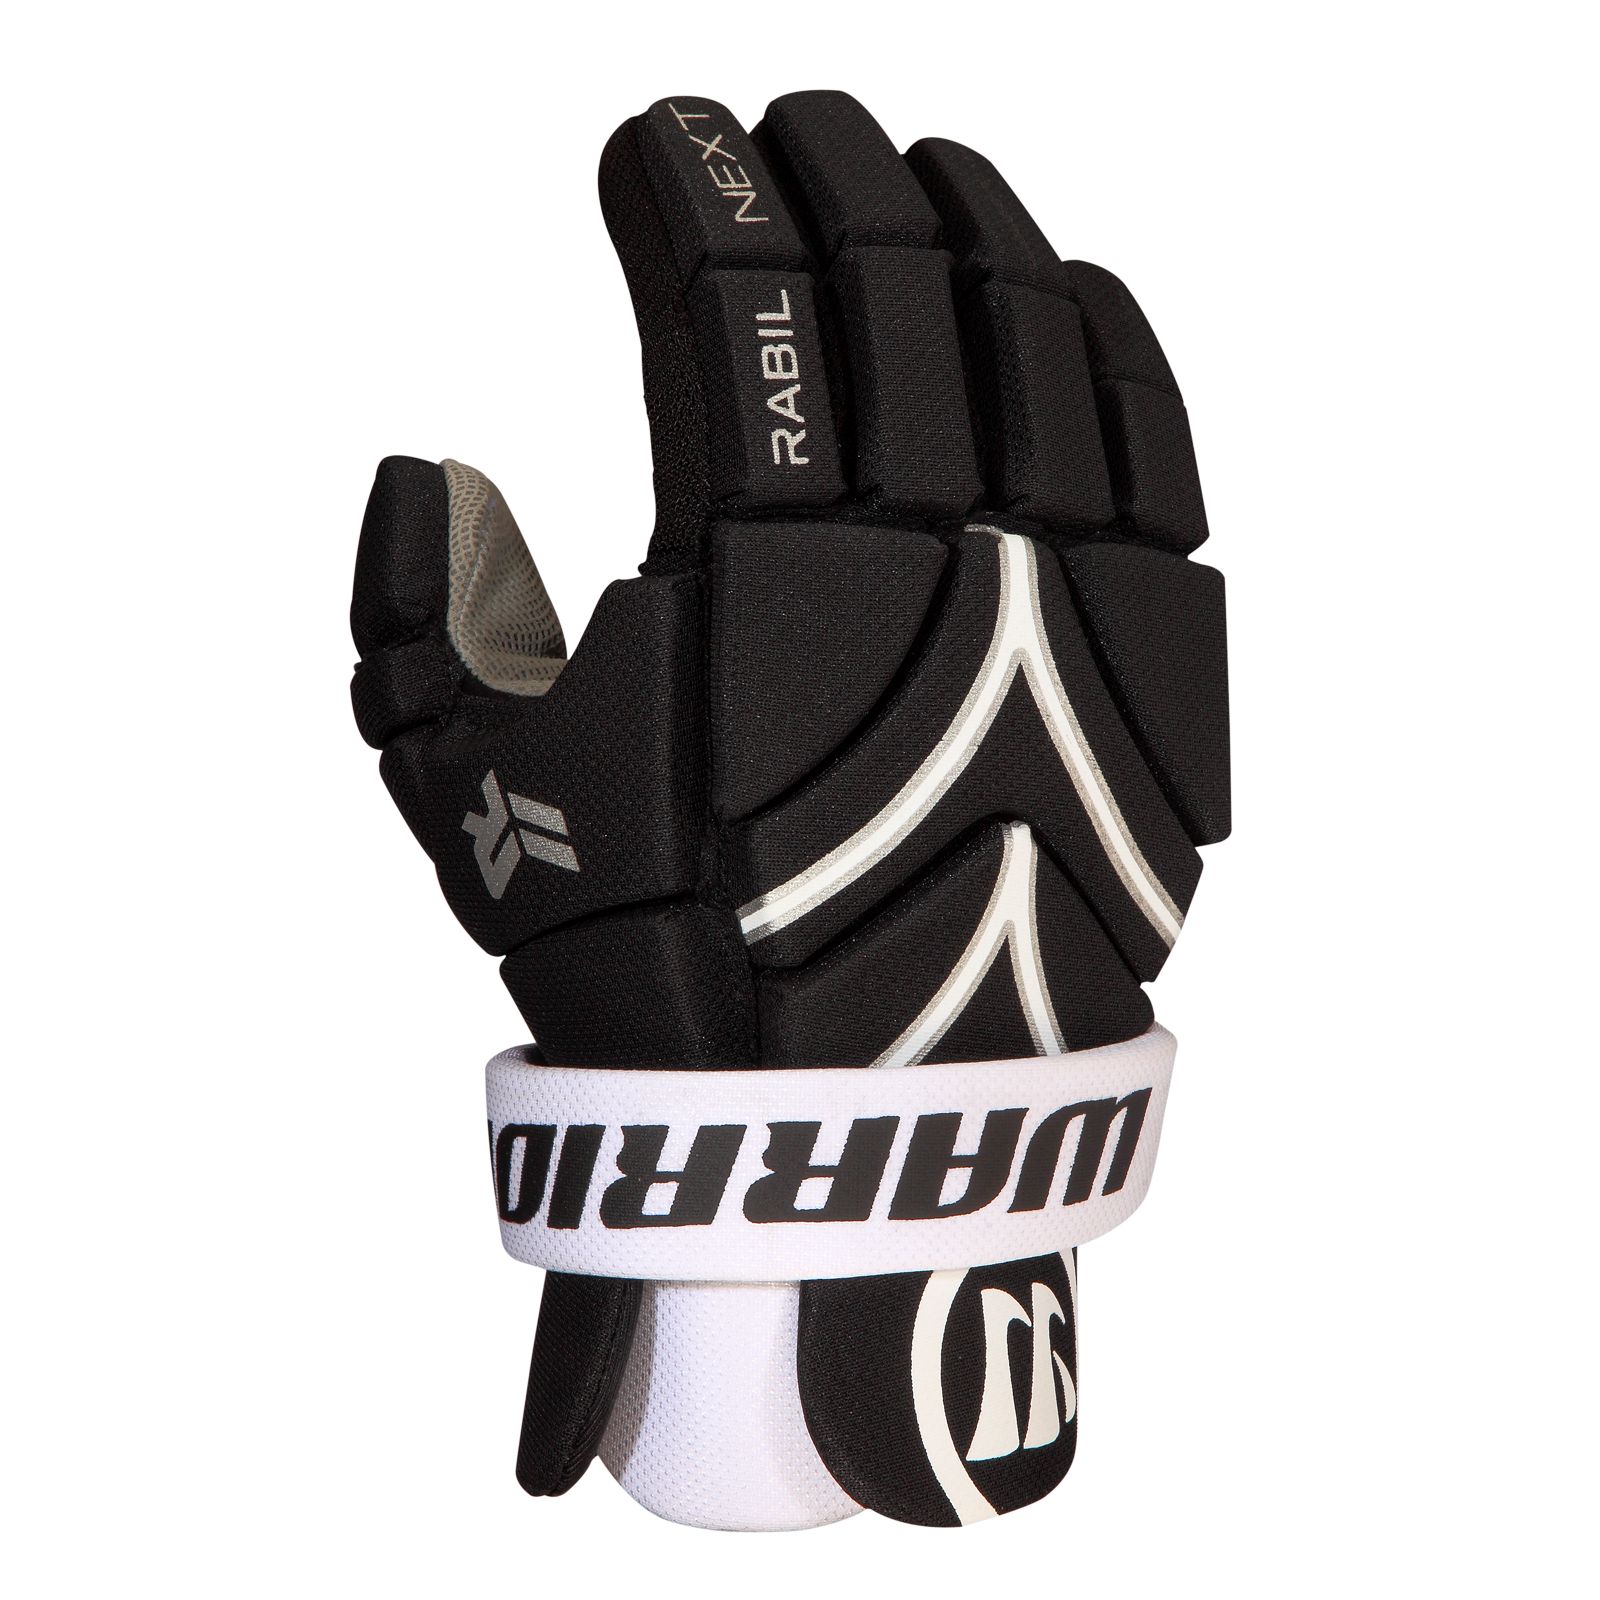 Rabil Next Glove (L/M), Black with White image number 0